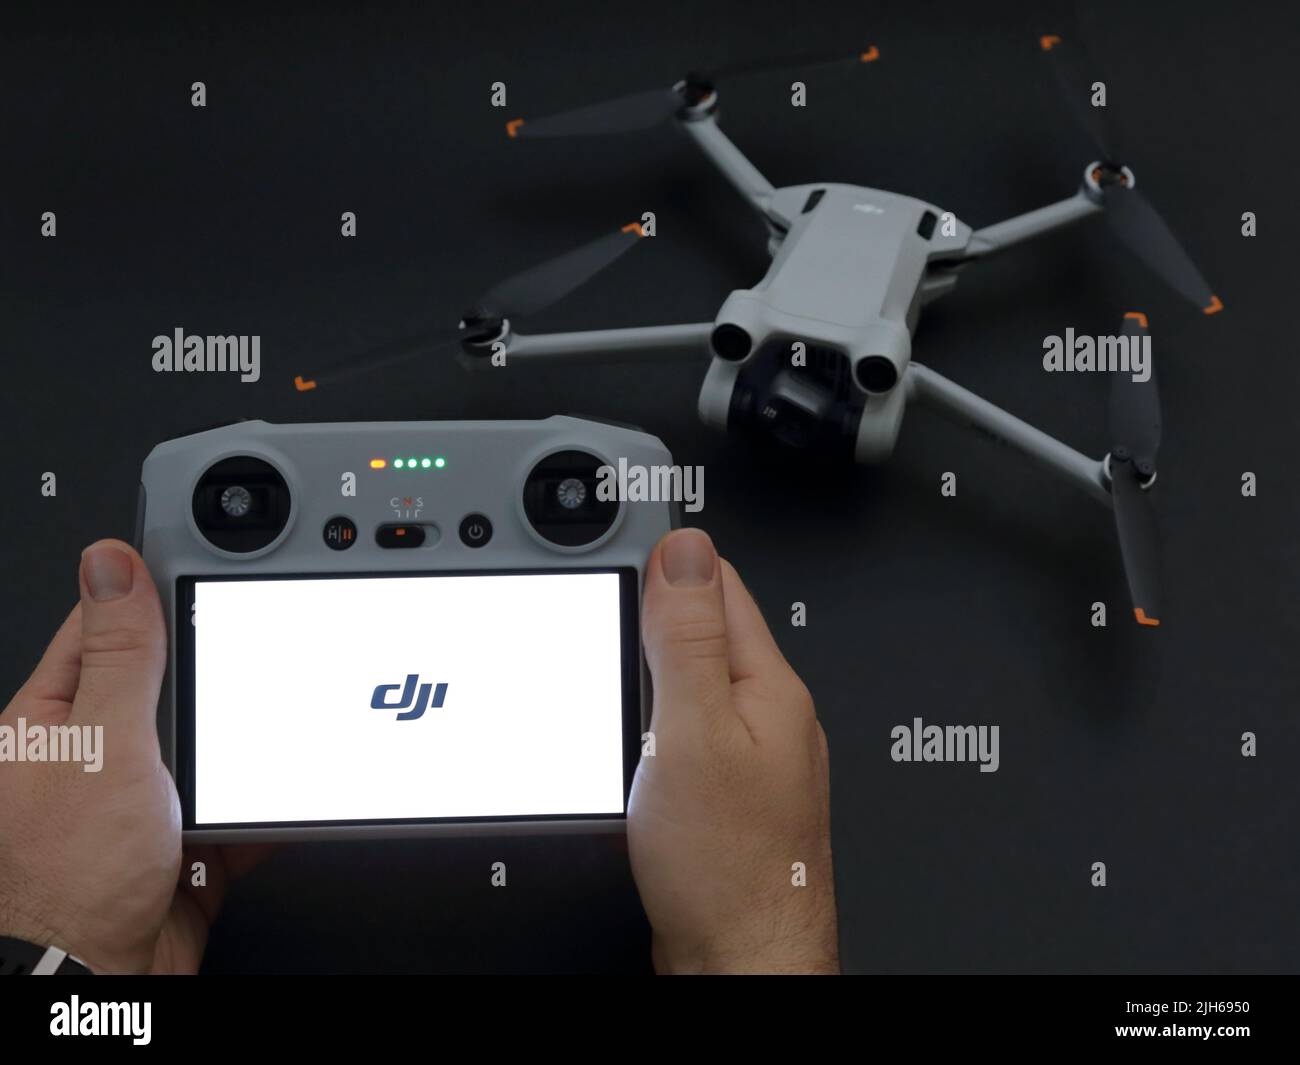 USA - July 14, 2022: A DJI remote controller, which has been newly-introduced in 2022, is shown featured, with a Mini 3 Pro drone / UAV. Stock Photo